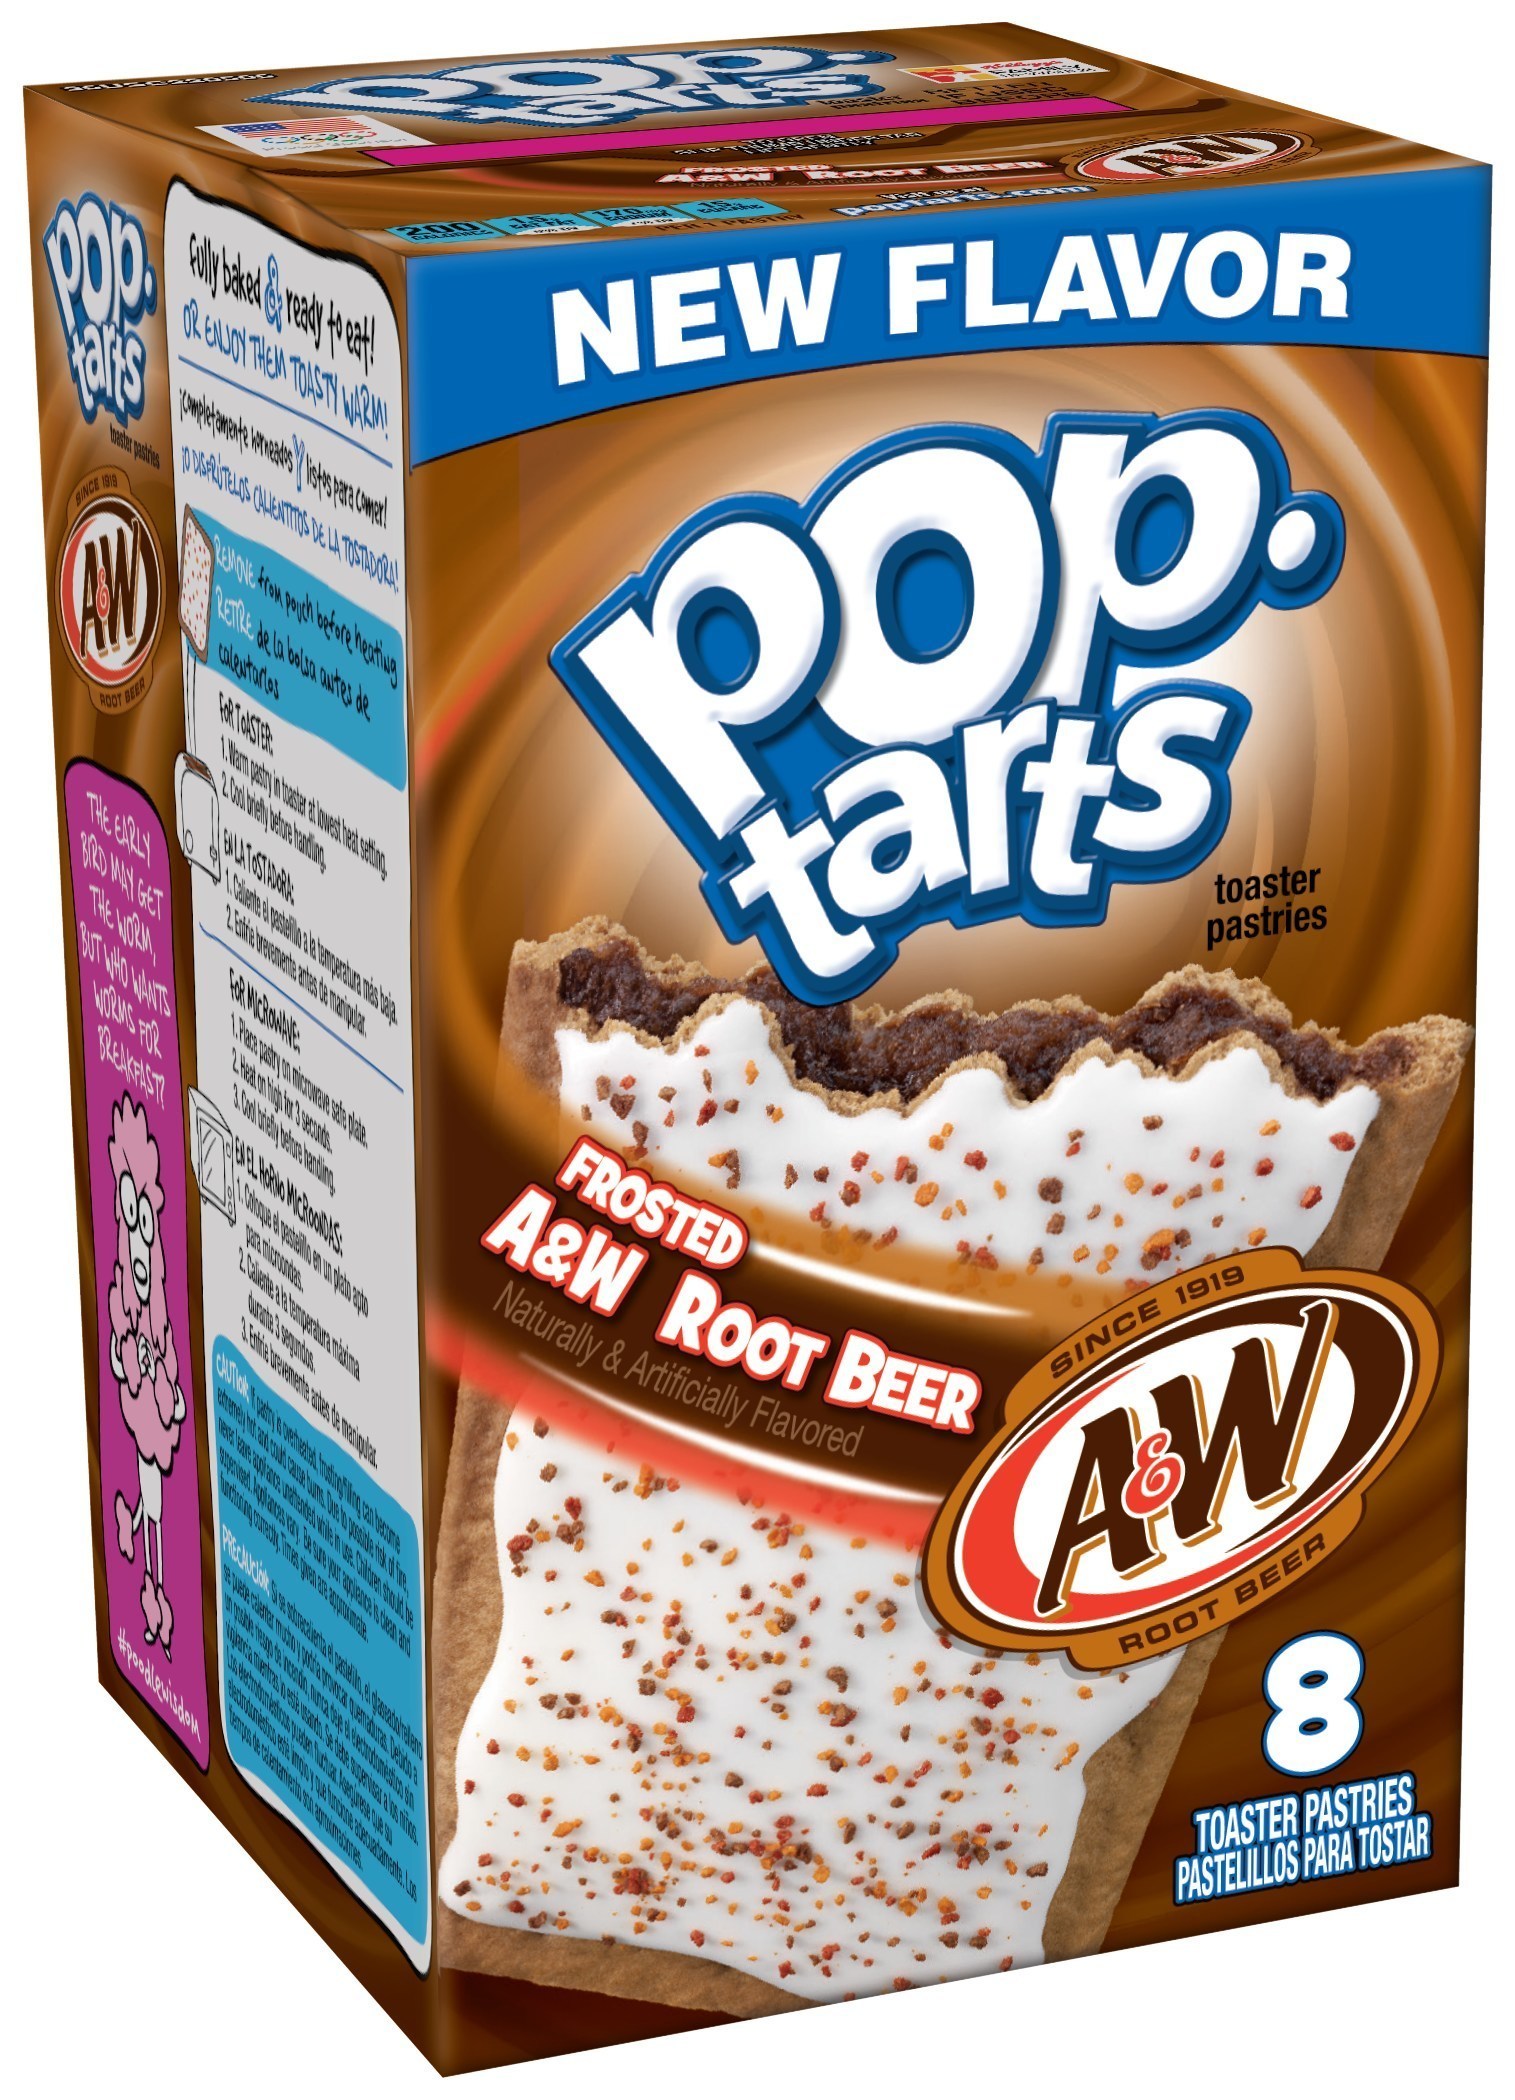 Kellogg rolls out root beer-flavored Pop-Tarts